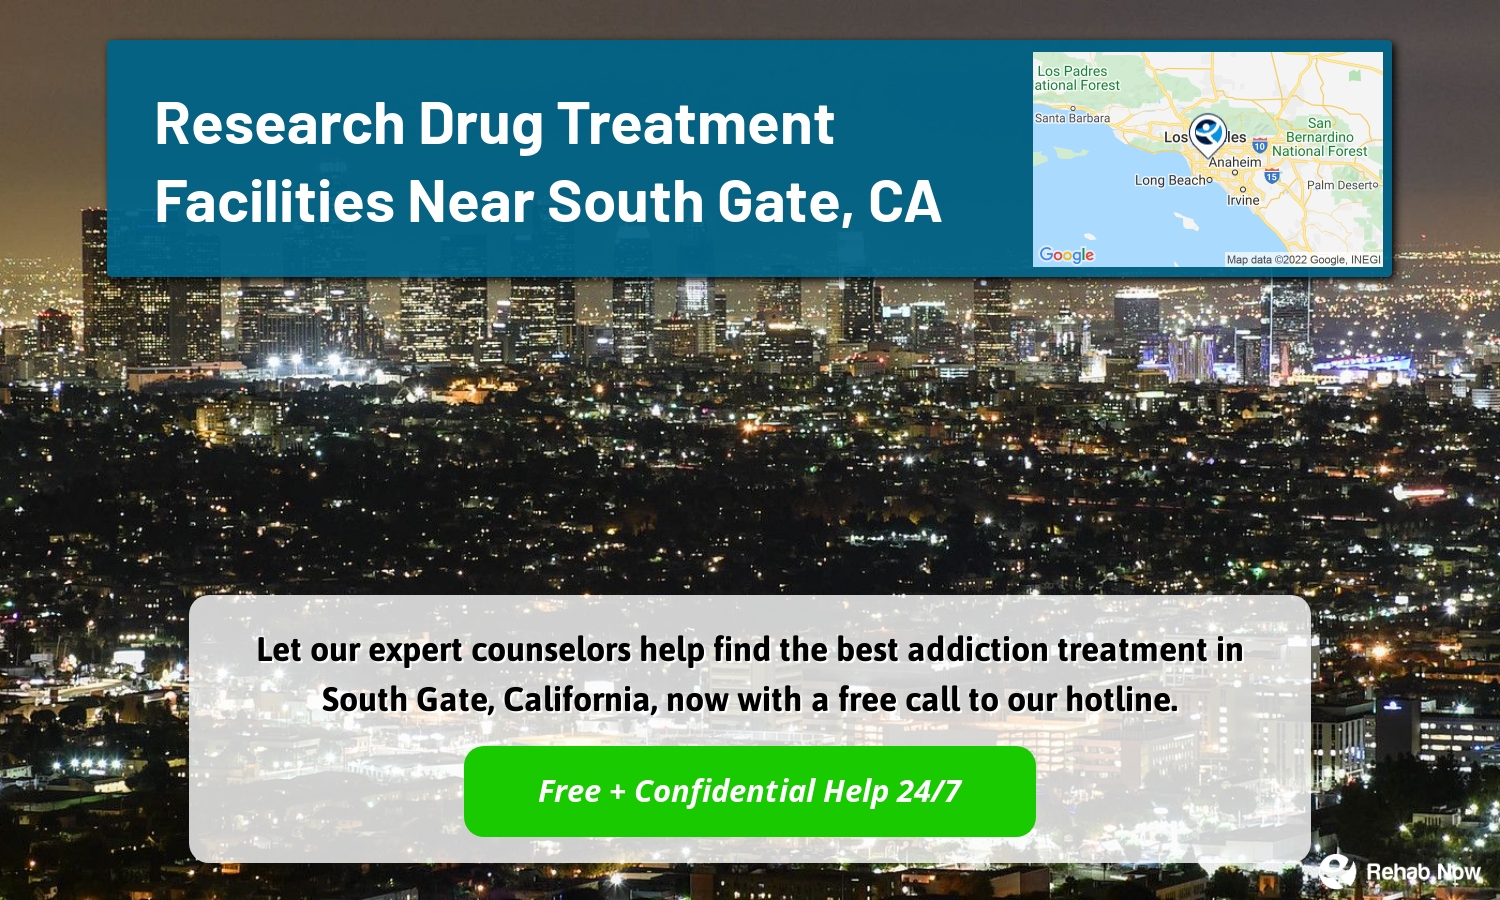 Let our expert counselors help find the best addiction treatment in South Gate, California, now with a free call to our hotline.